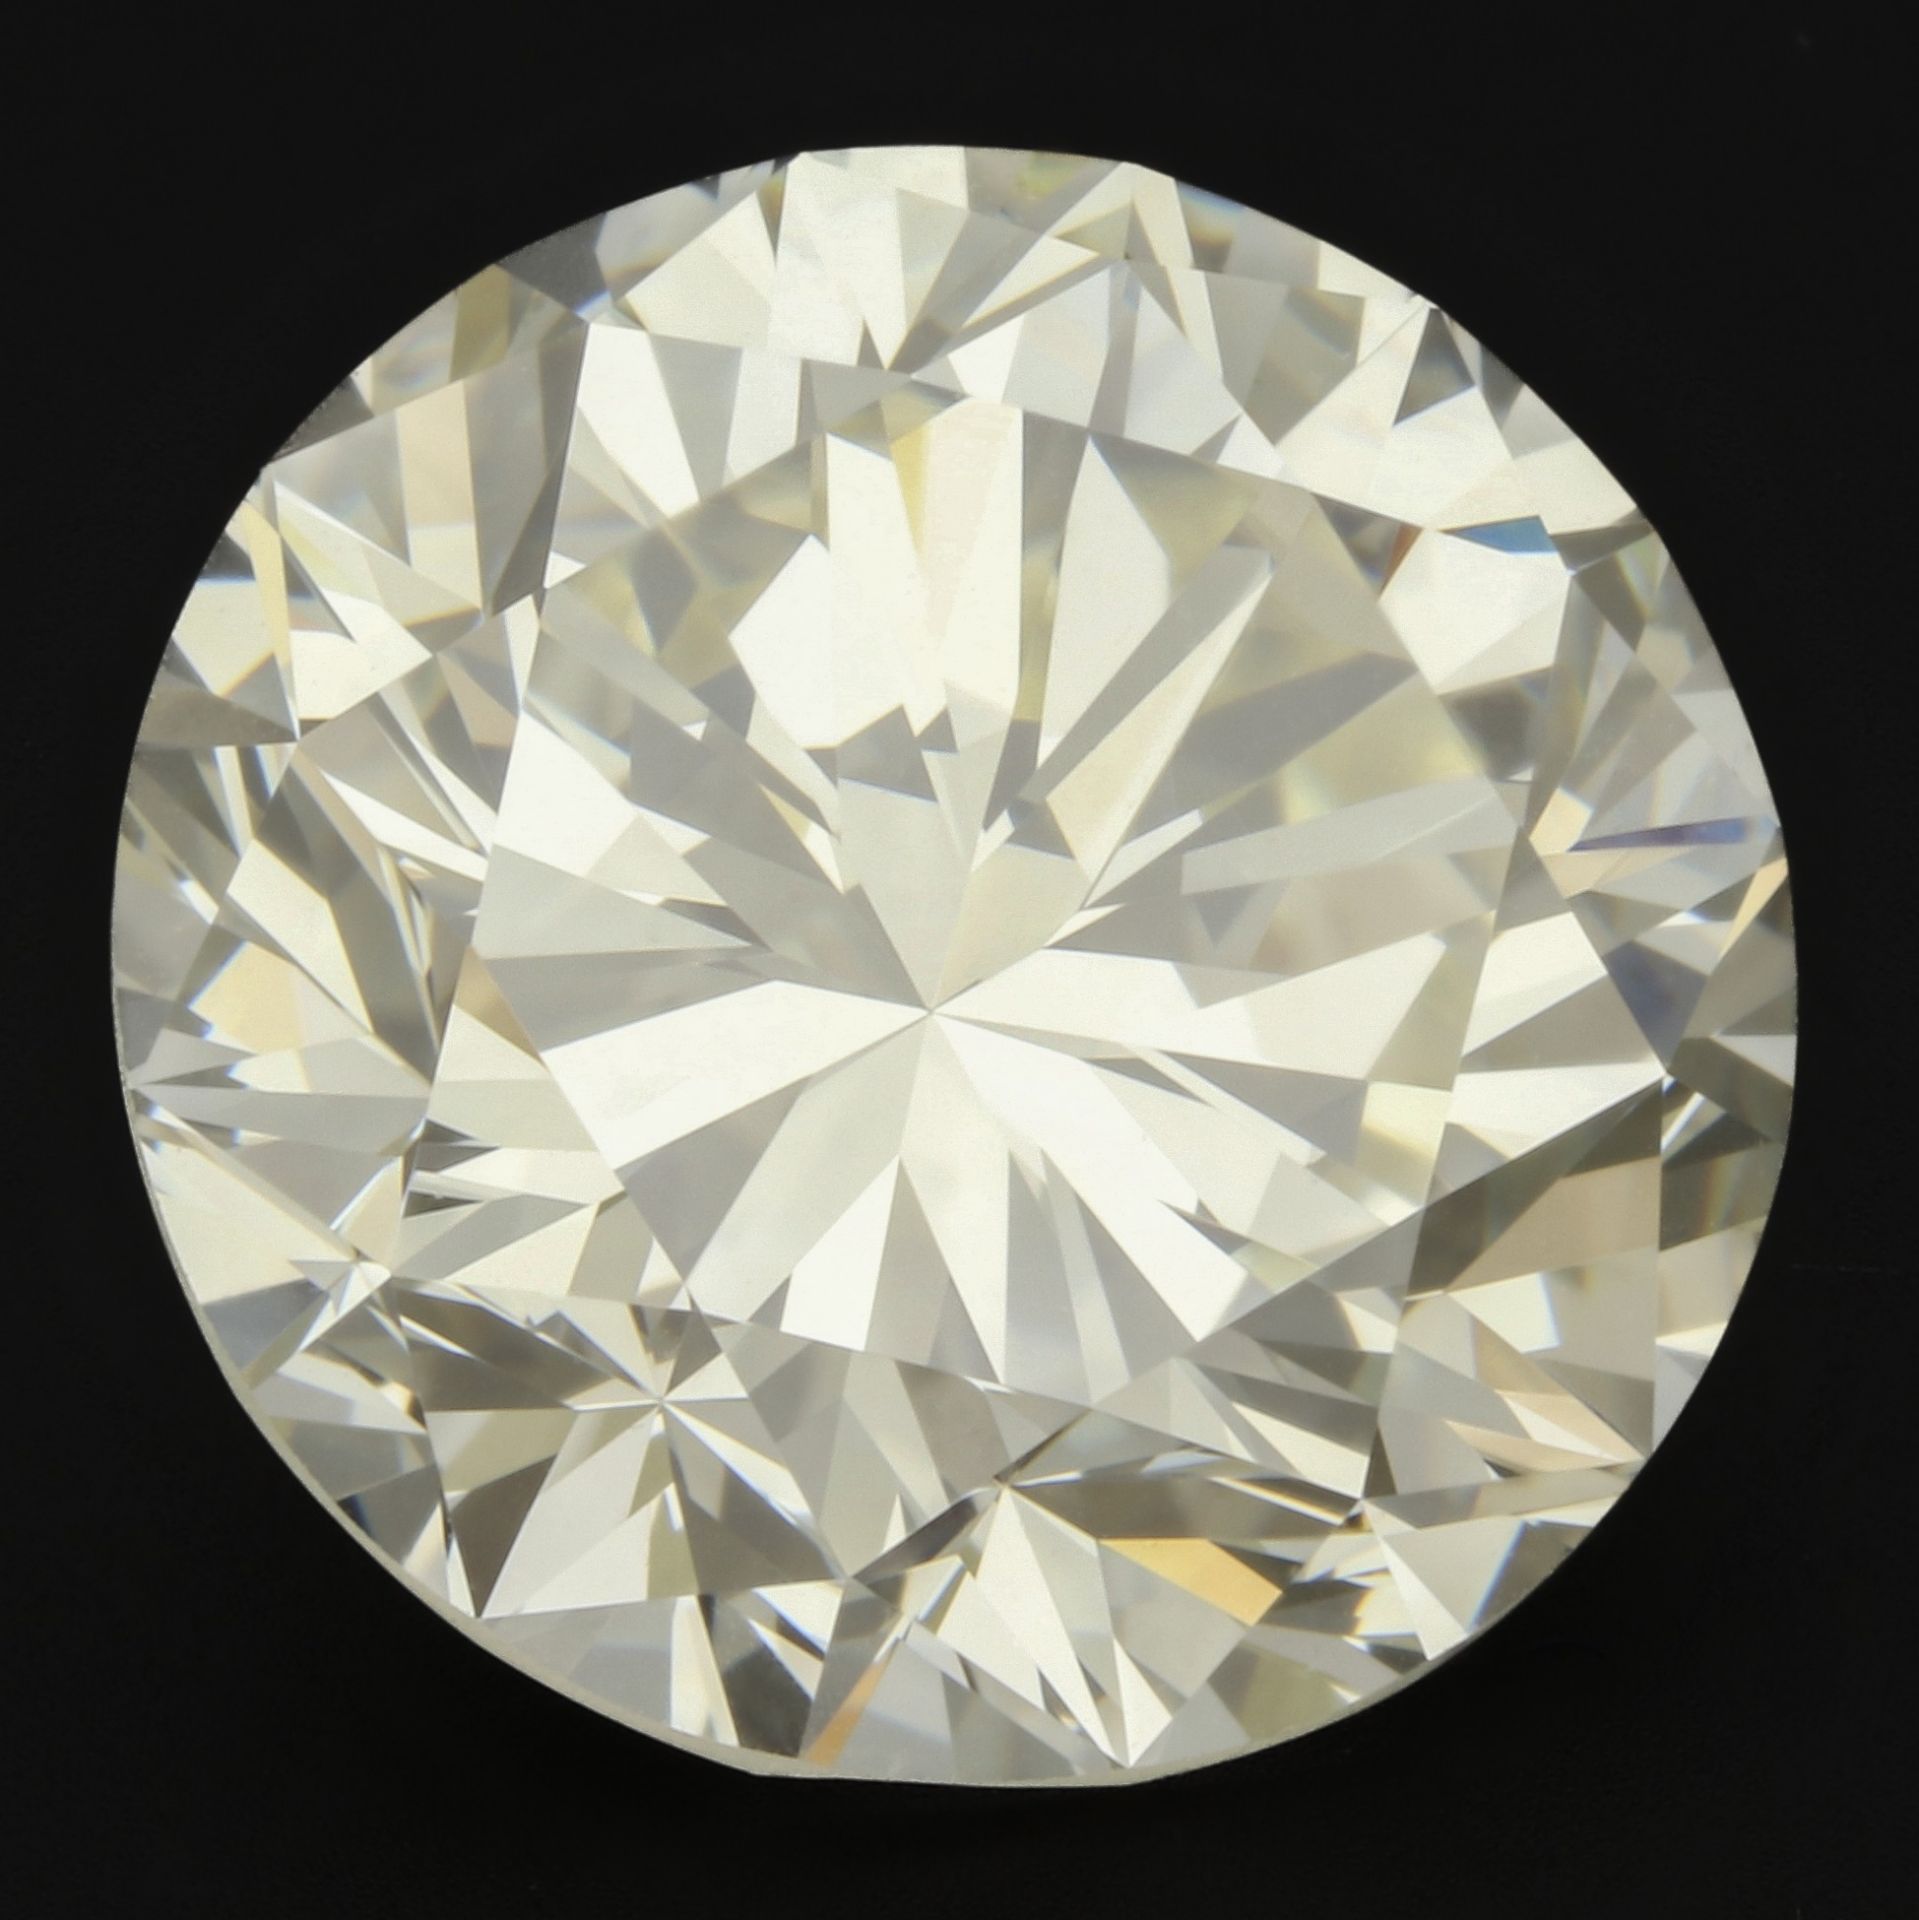 No Reserve - 3.01 ct. HRD-certified natural diamond.